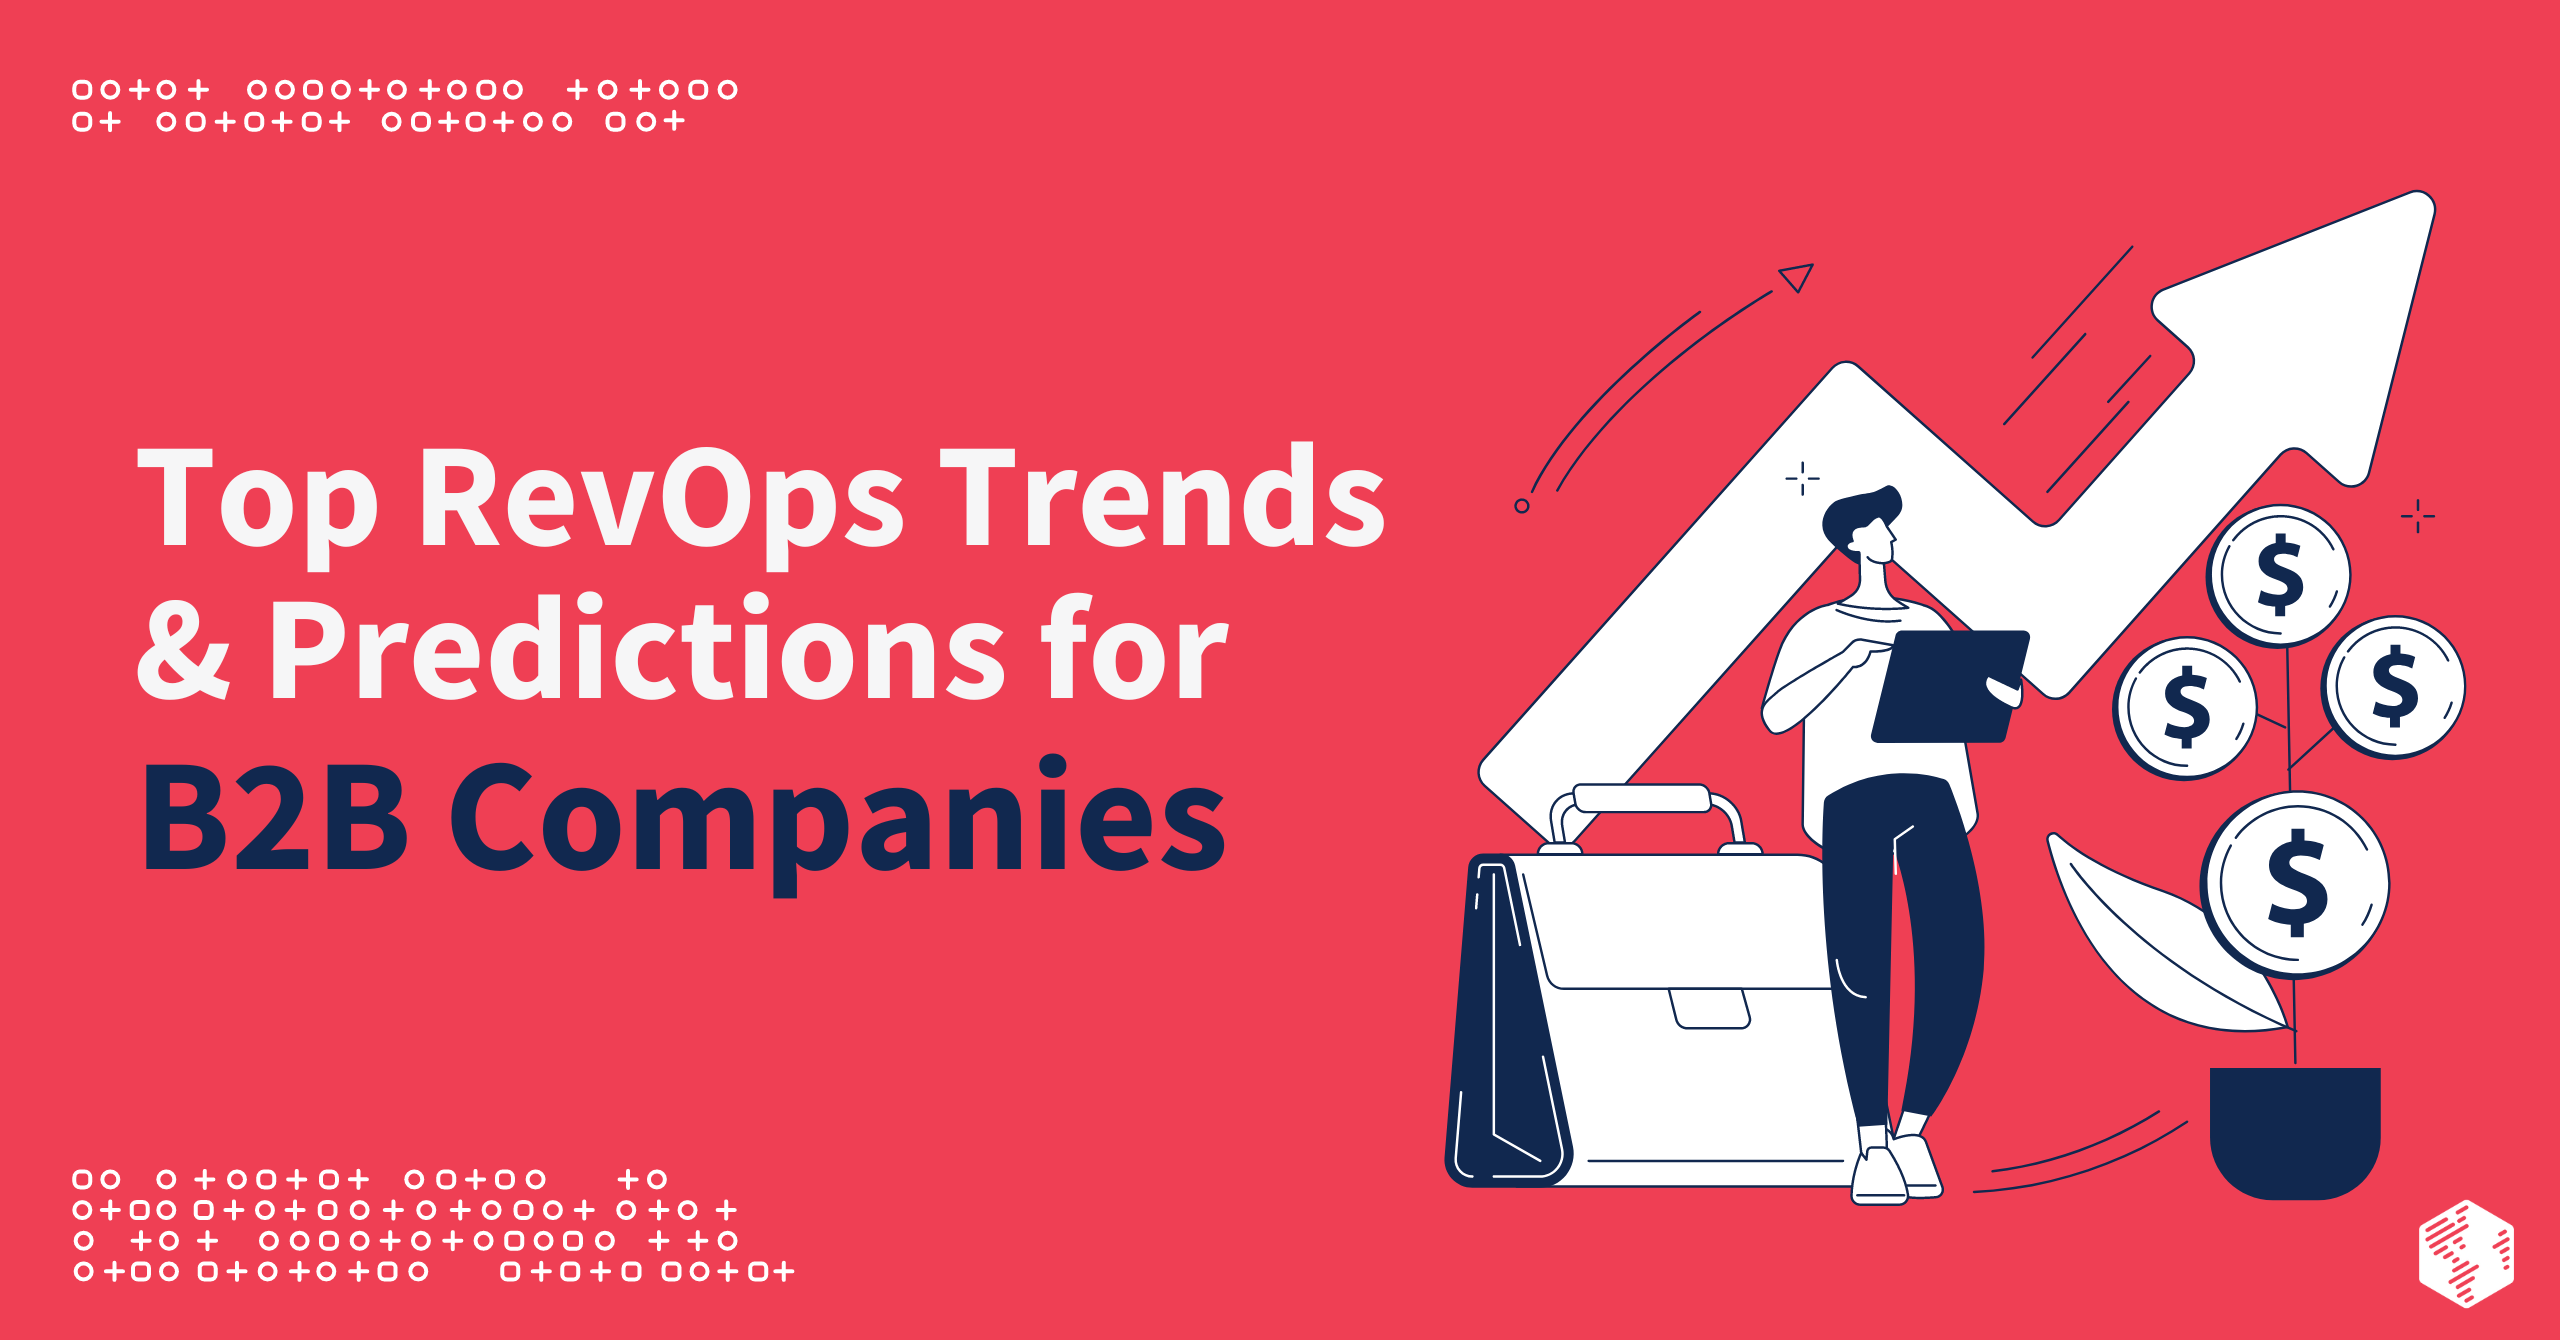 Top RevOps Trends & Predictions for B2B Companies